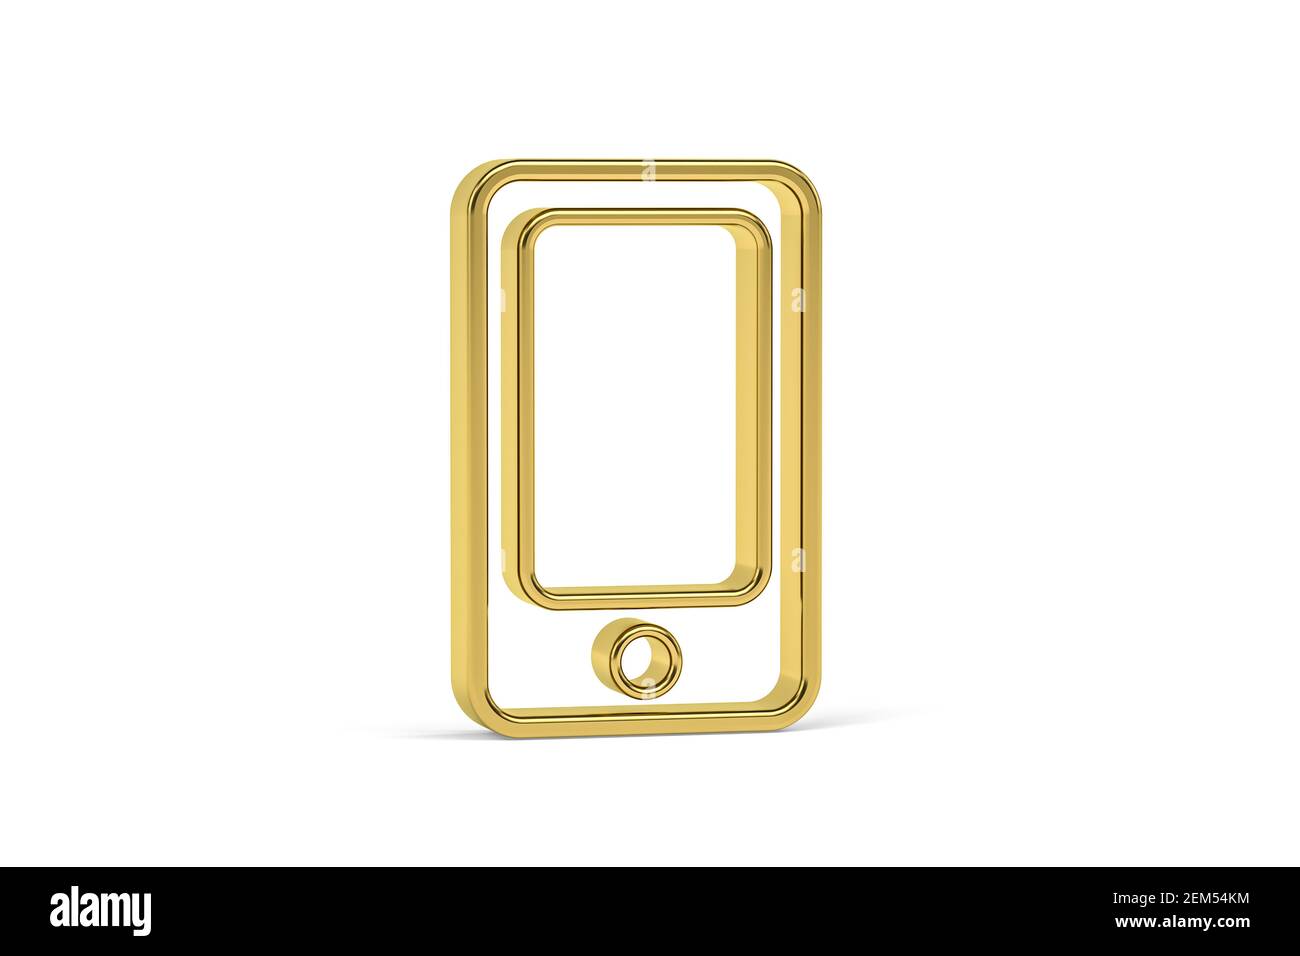 Golden 3d mobile phone icon isolated on white background - 3D render Stock Photo